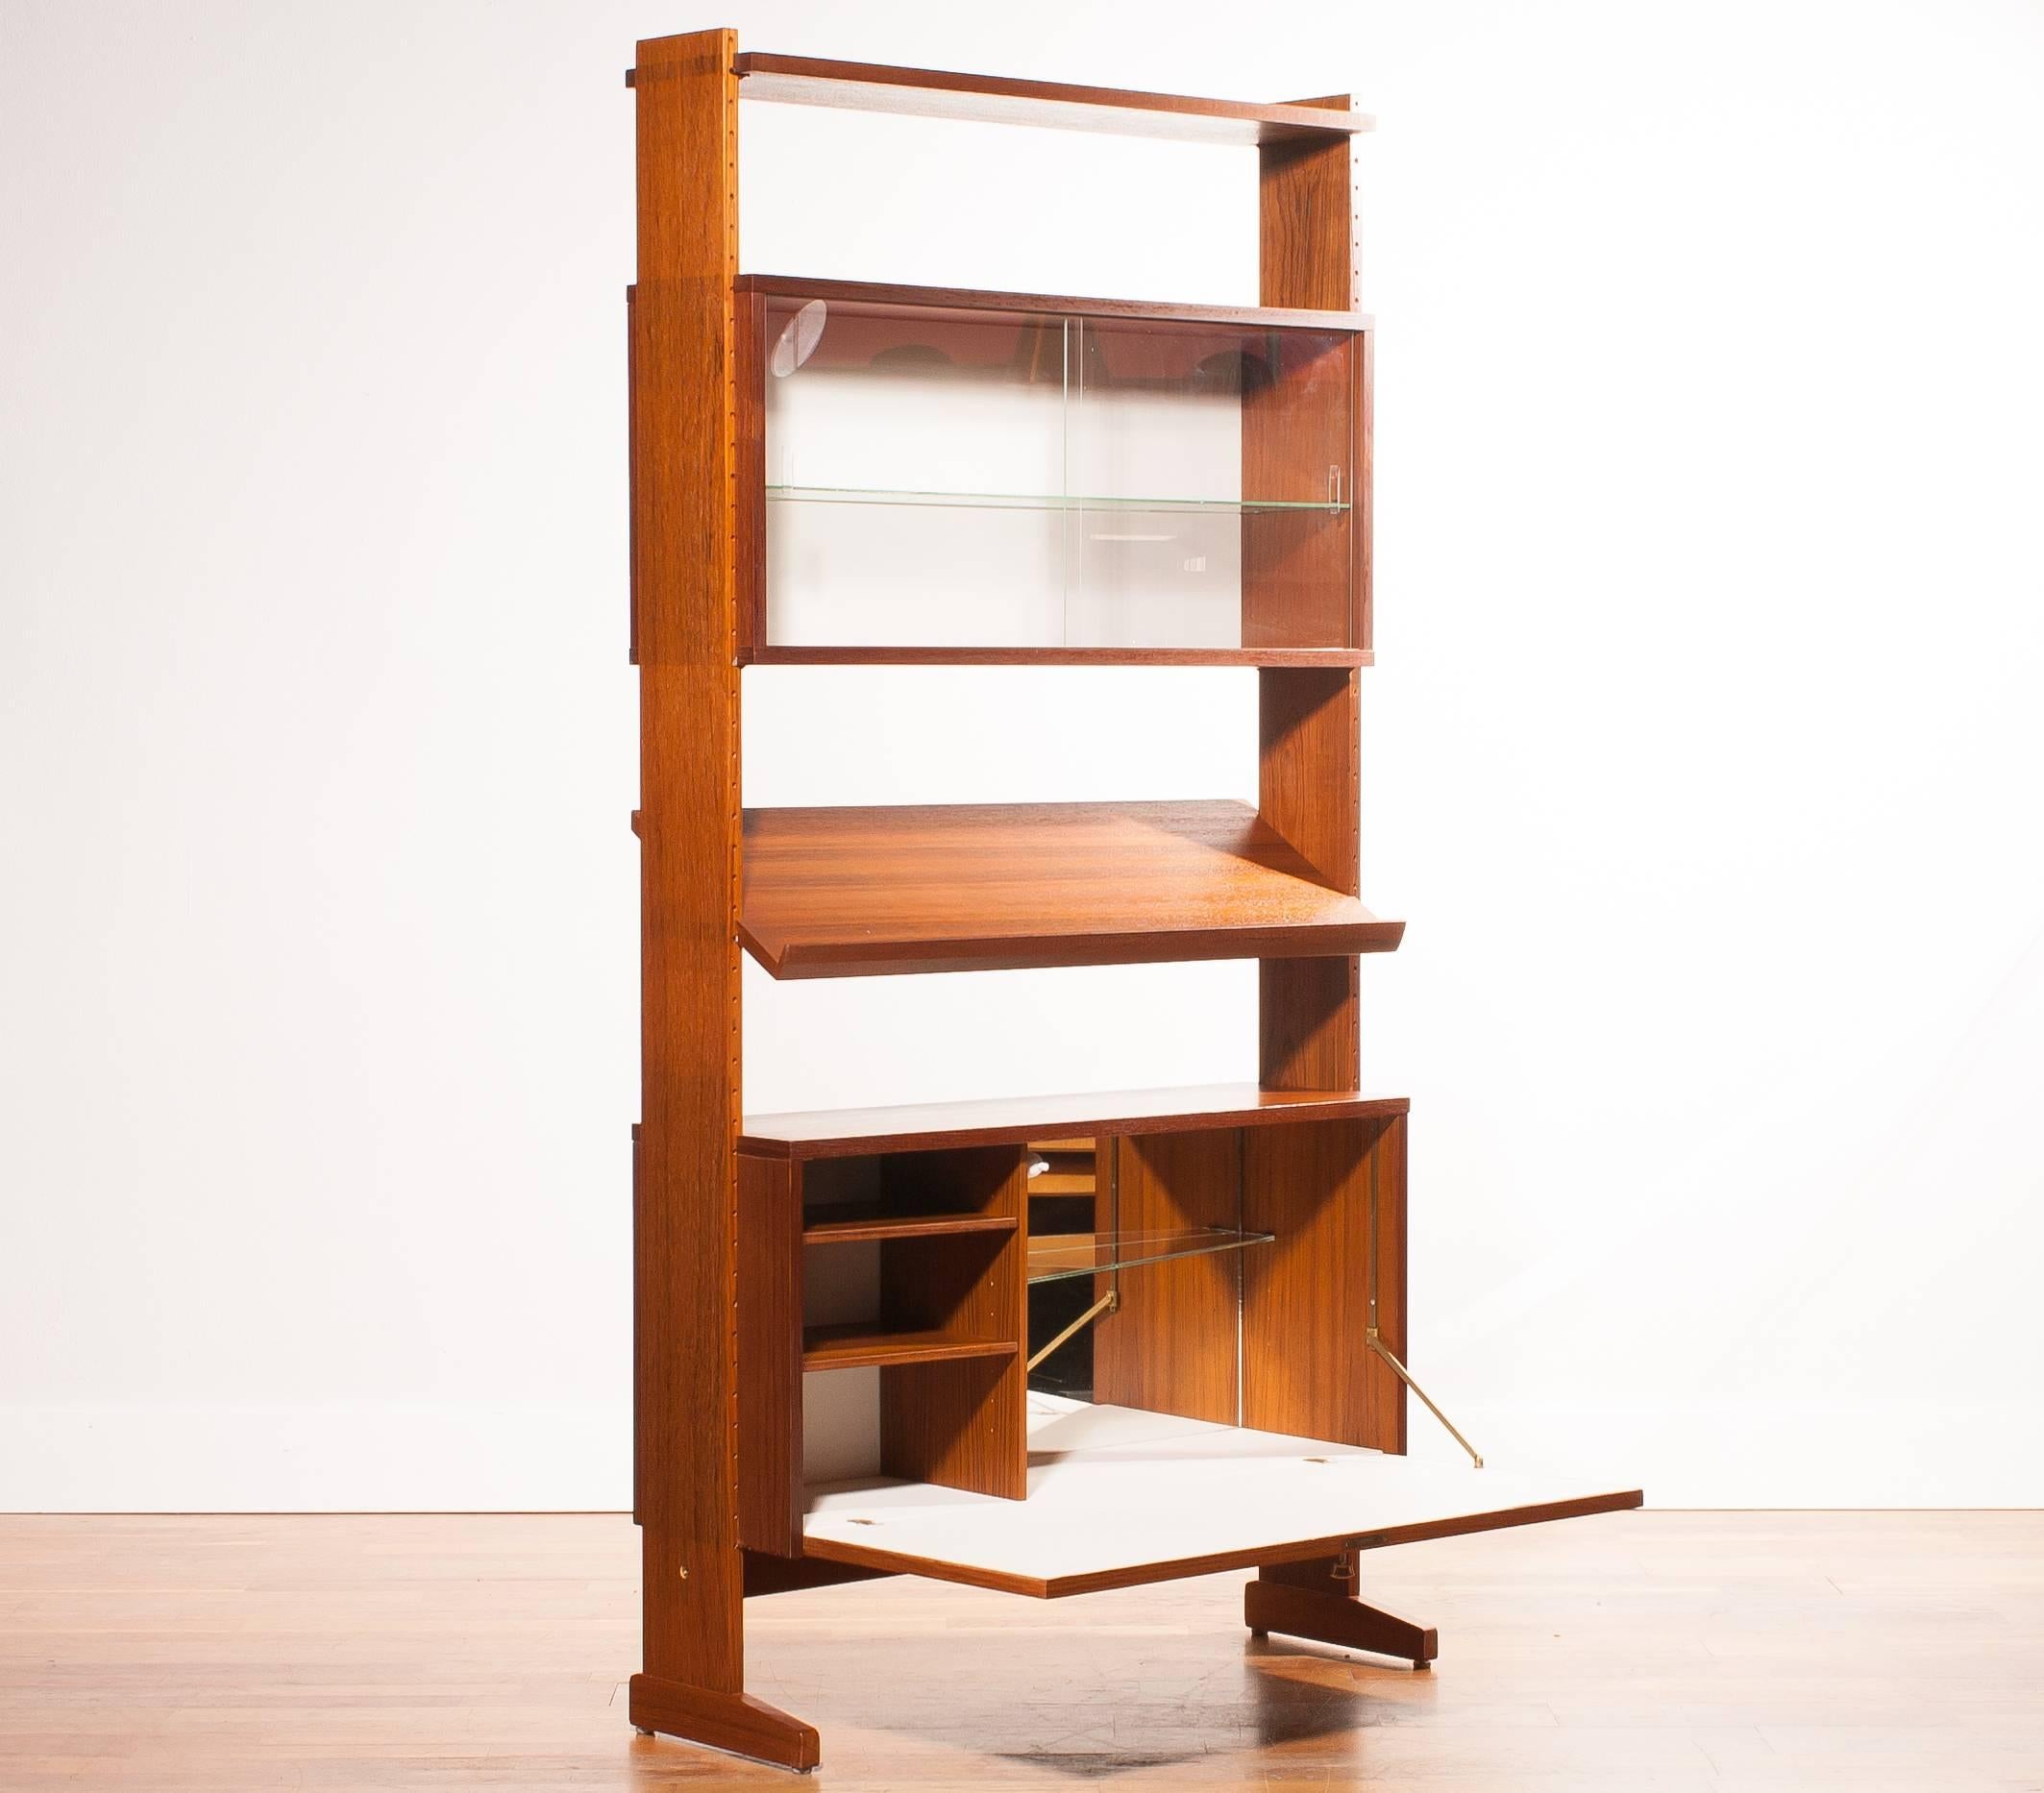 Extremely rare adjustable "cocktail" bar, "shelf system" by Nils Strinning called "Parade".

All in teak and also with two extra shelfs so you can create your own favorite type of cabinet. Depth of the shelfs is 22